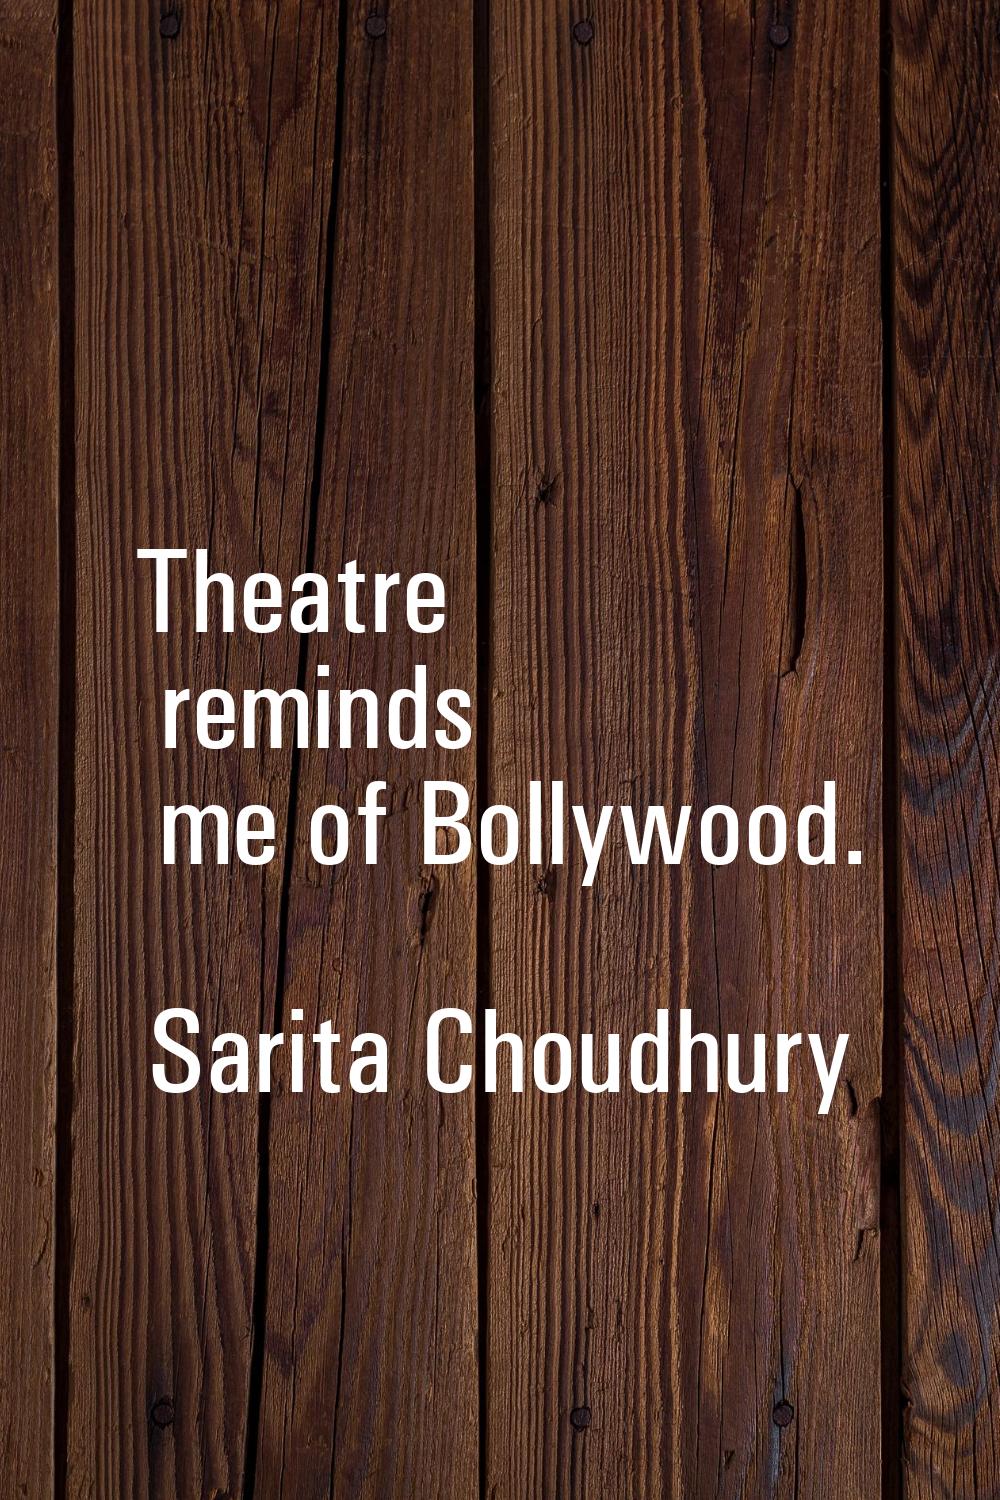 Theatre reminds me of Bollywood.